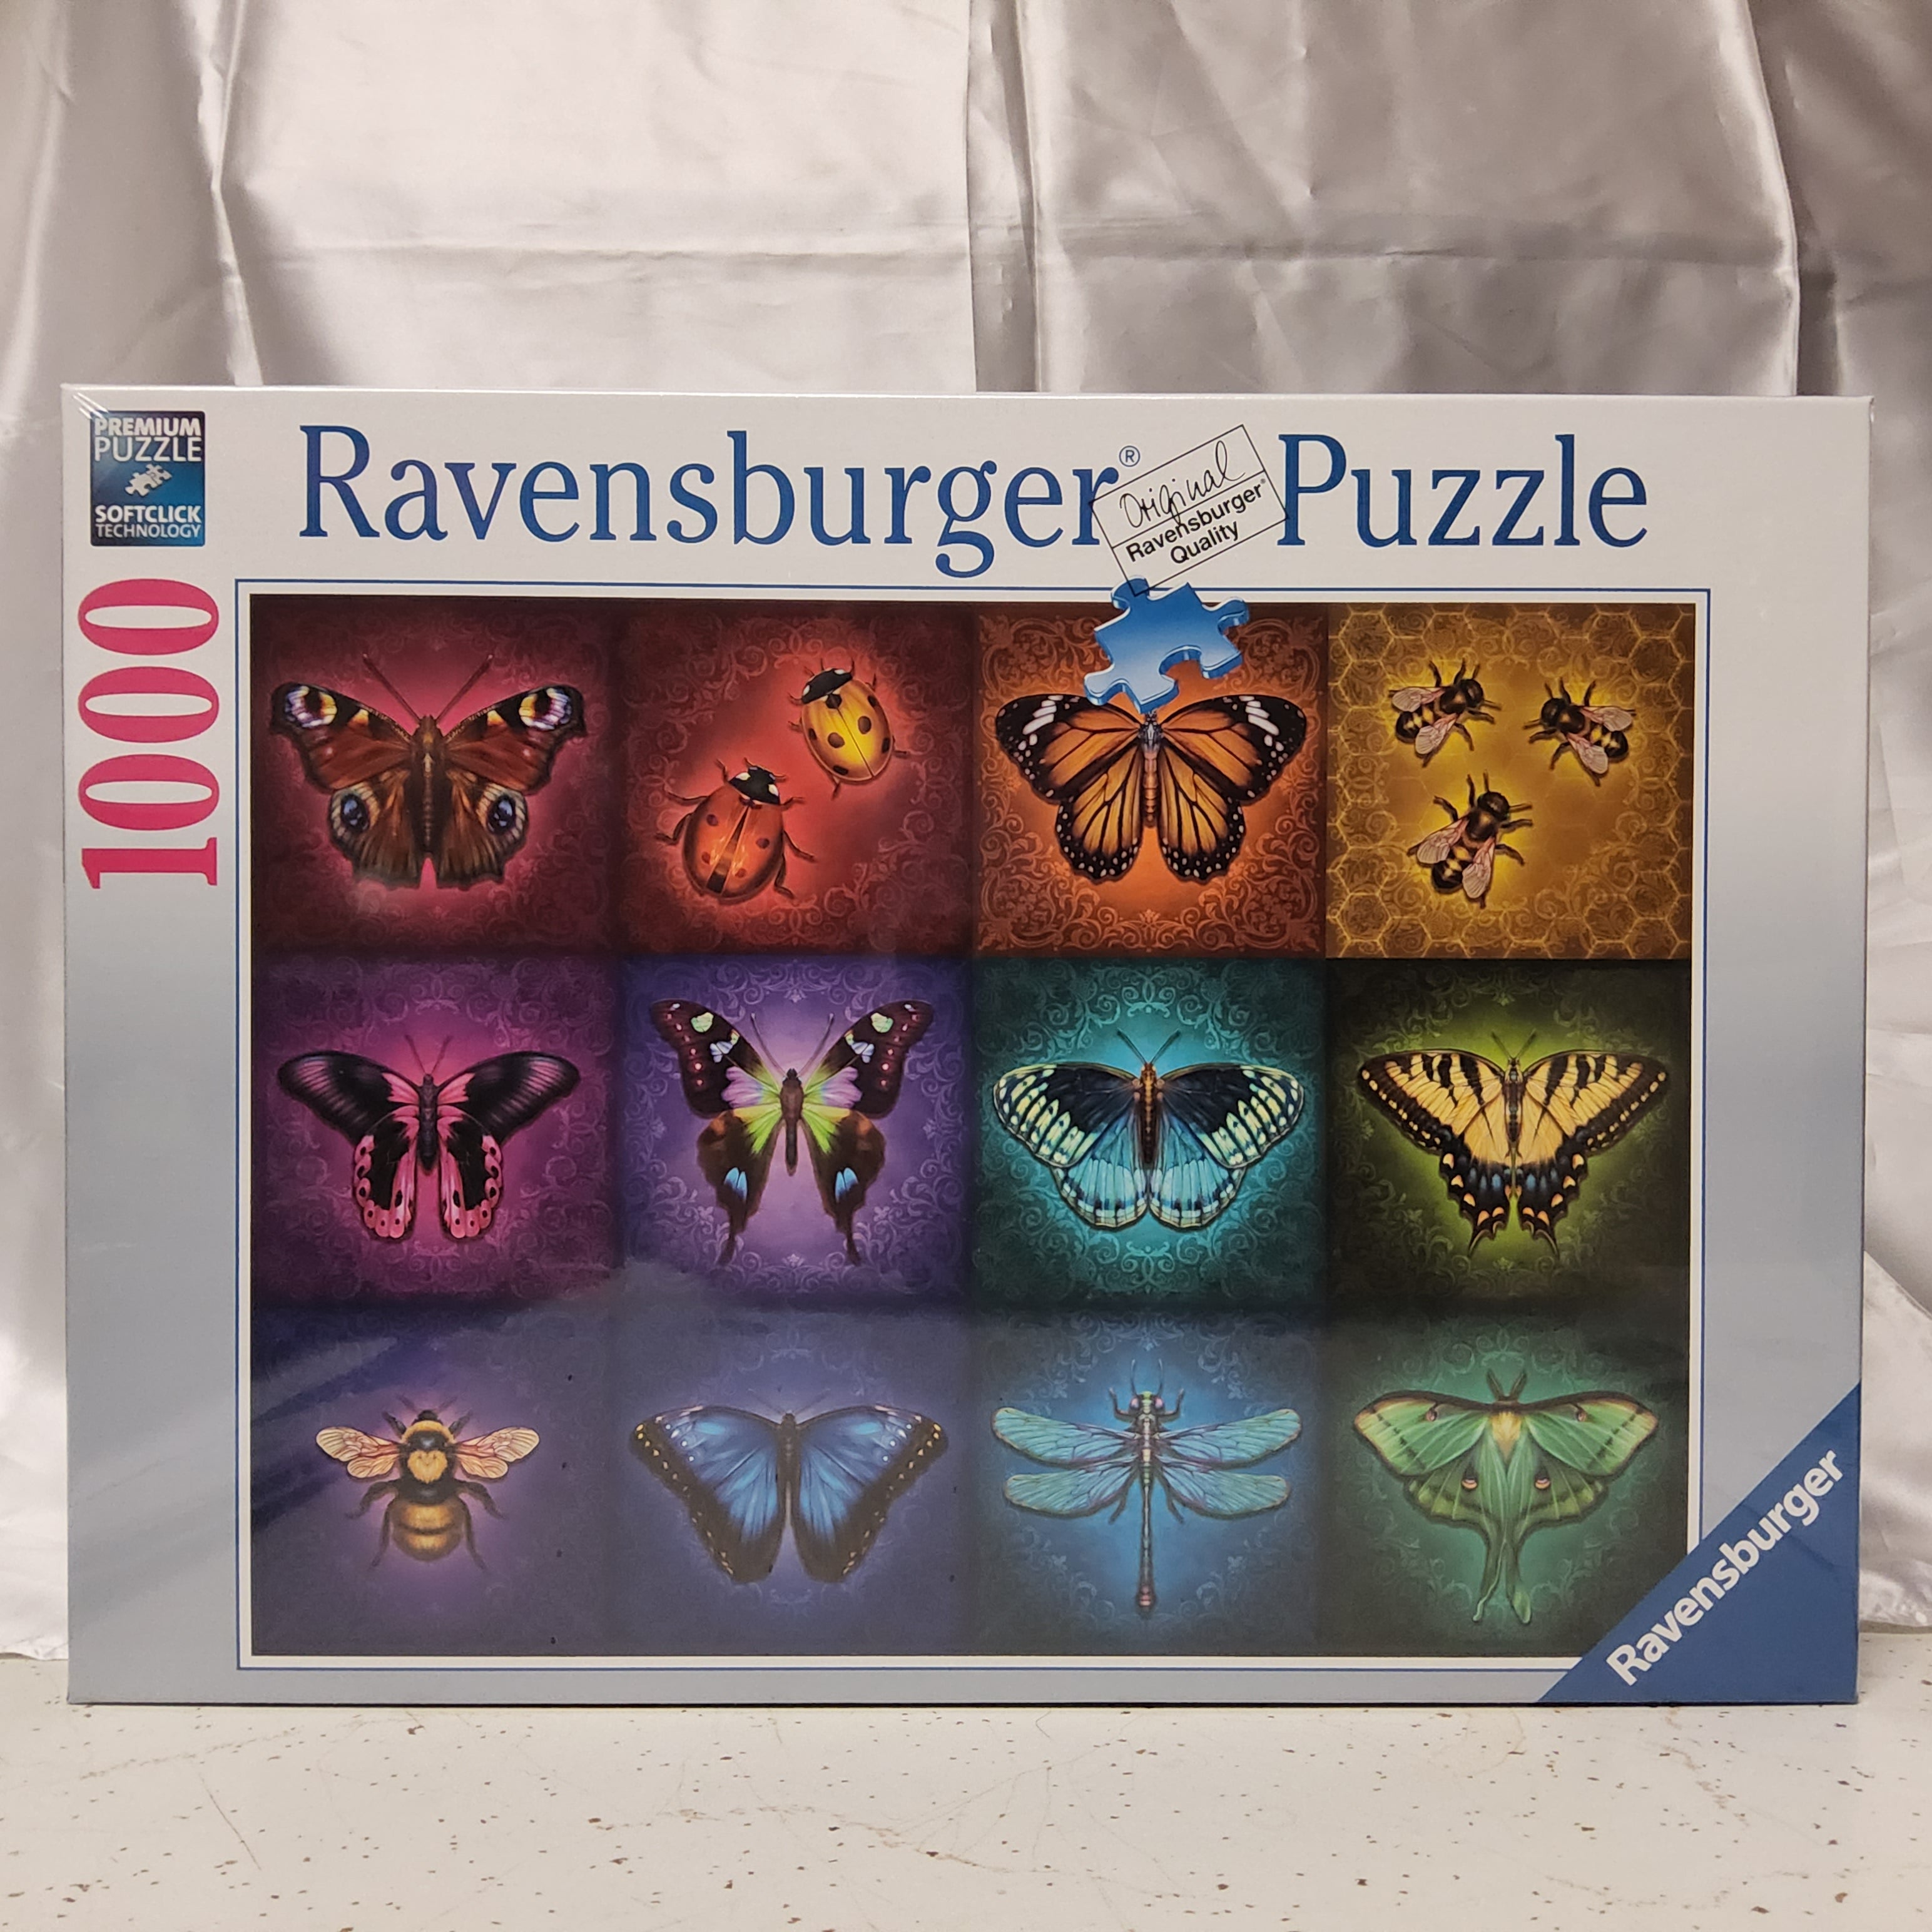 Ravensburger Puzzle - Winged Things - 1000 pieces - #16818